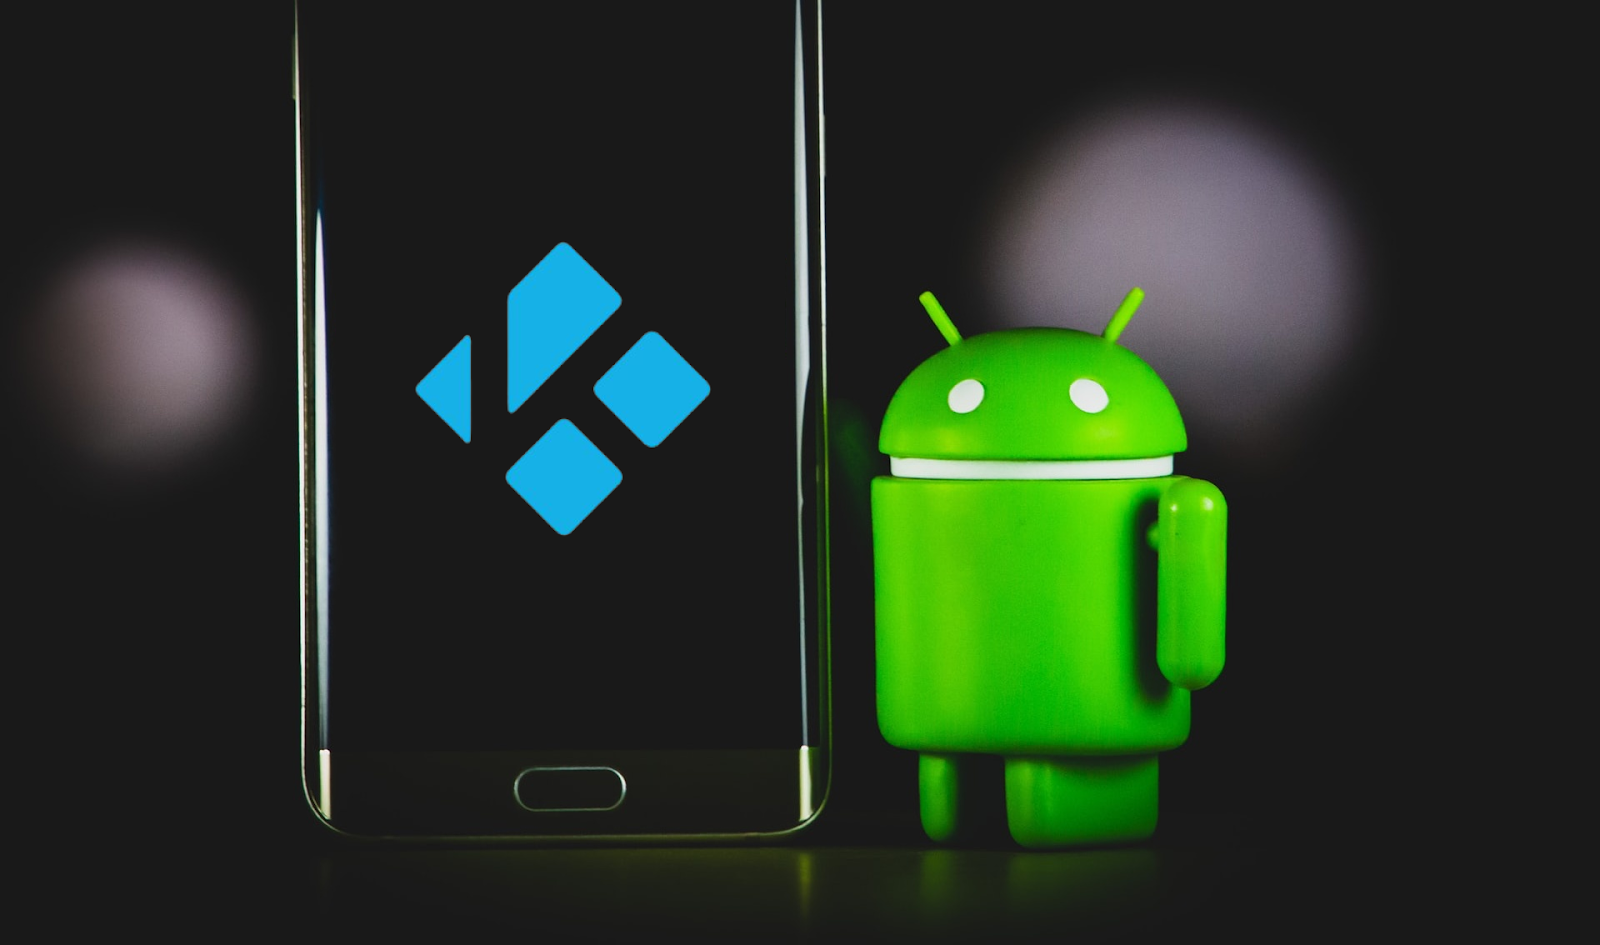 How to Install Kodi on Android